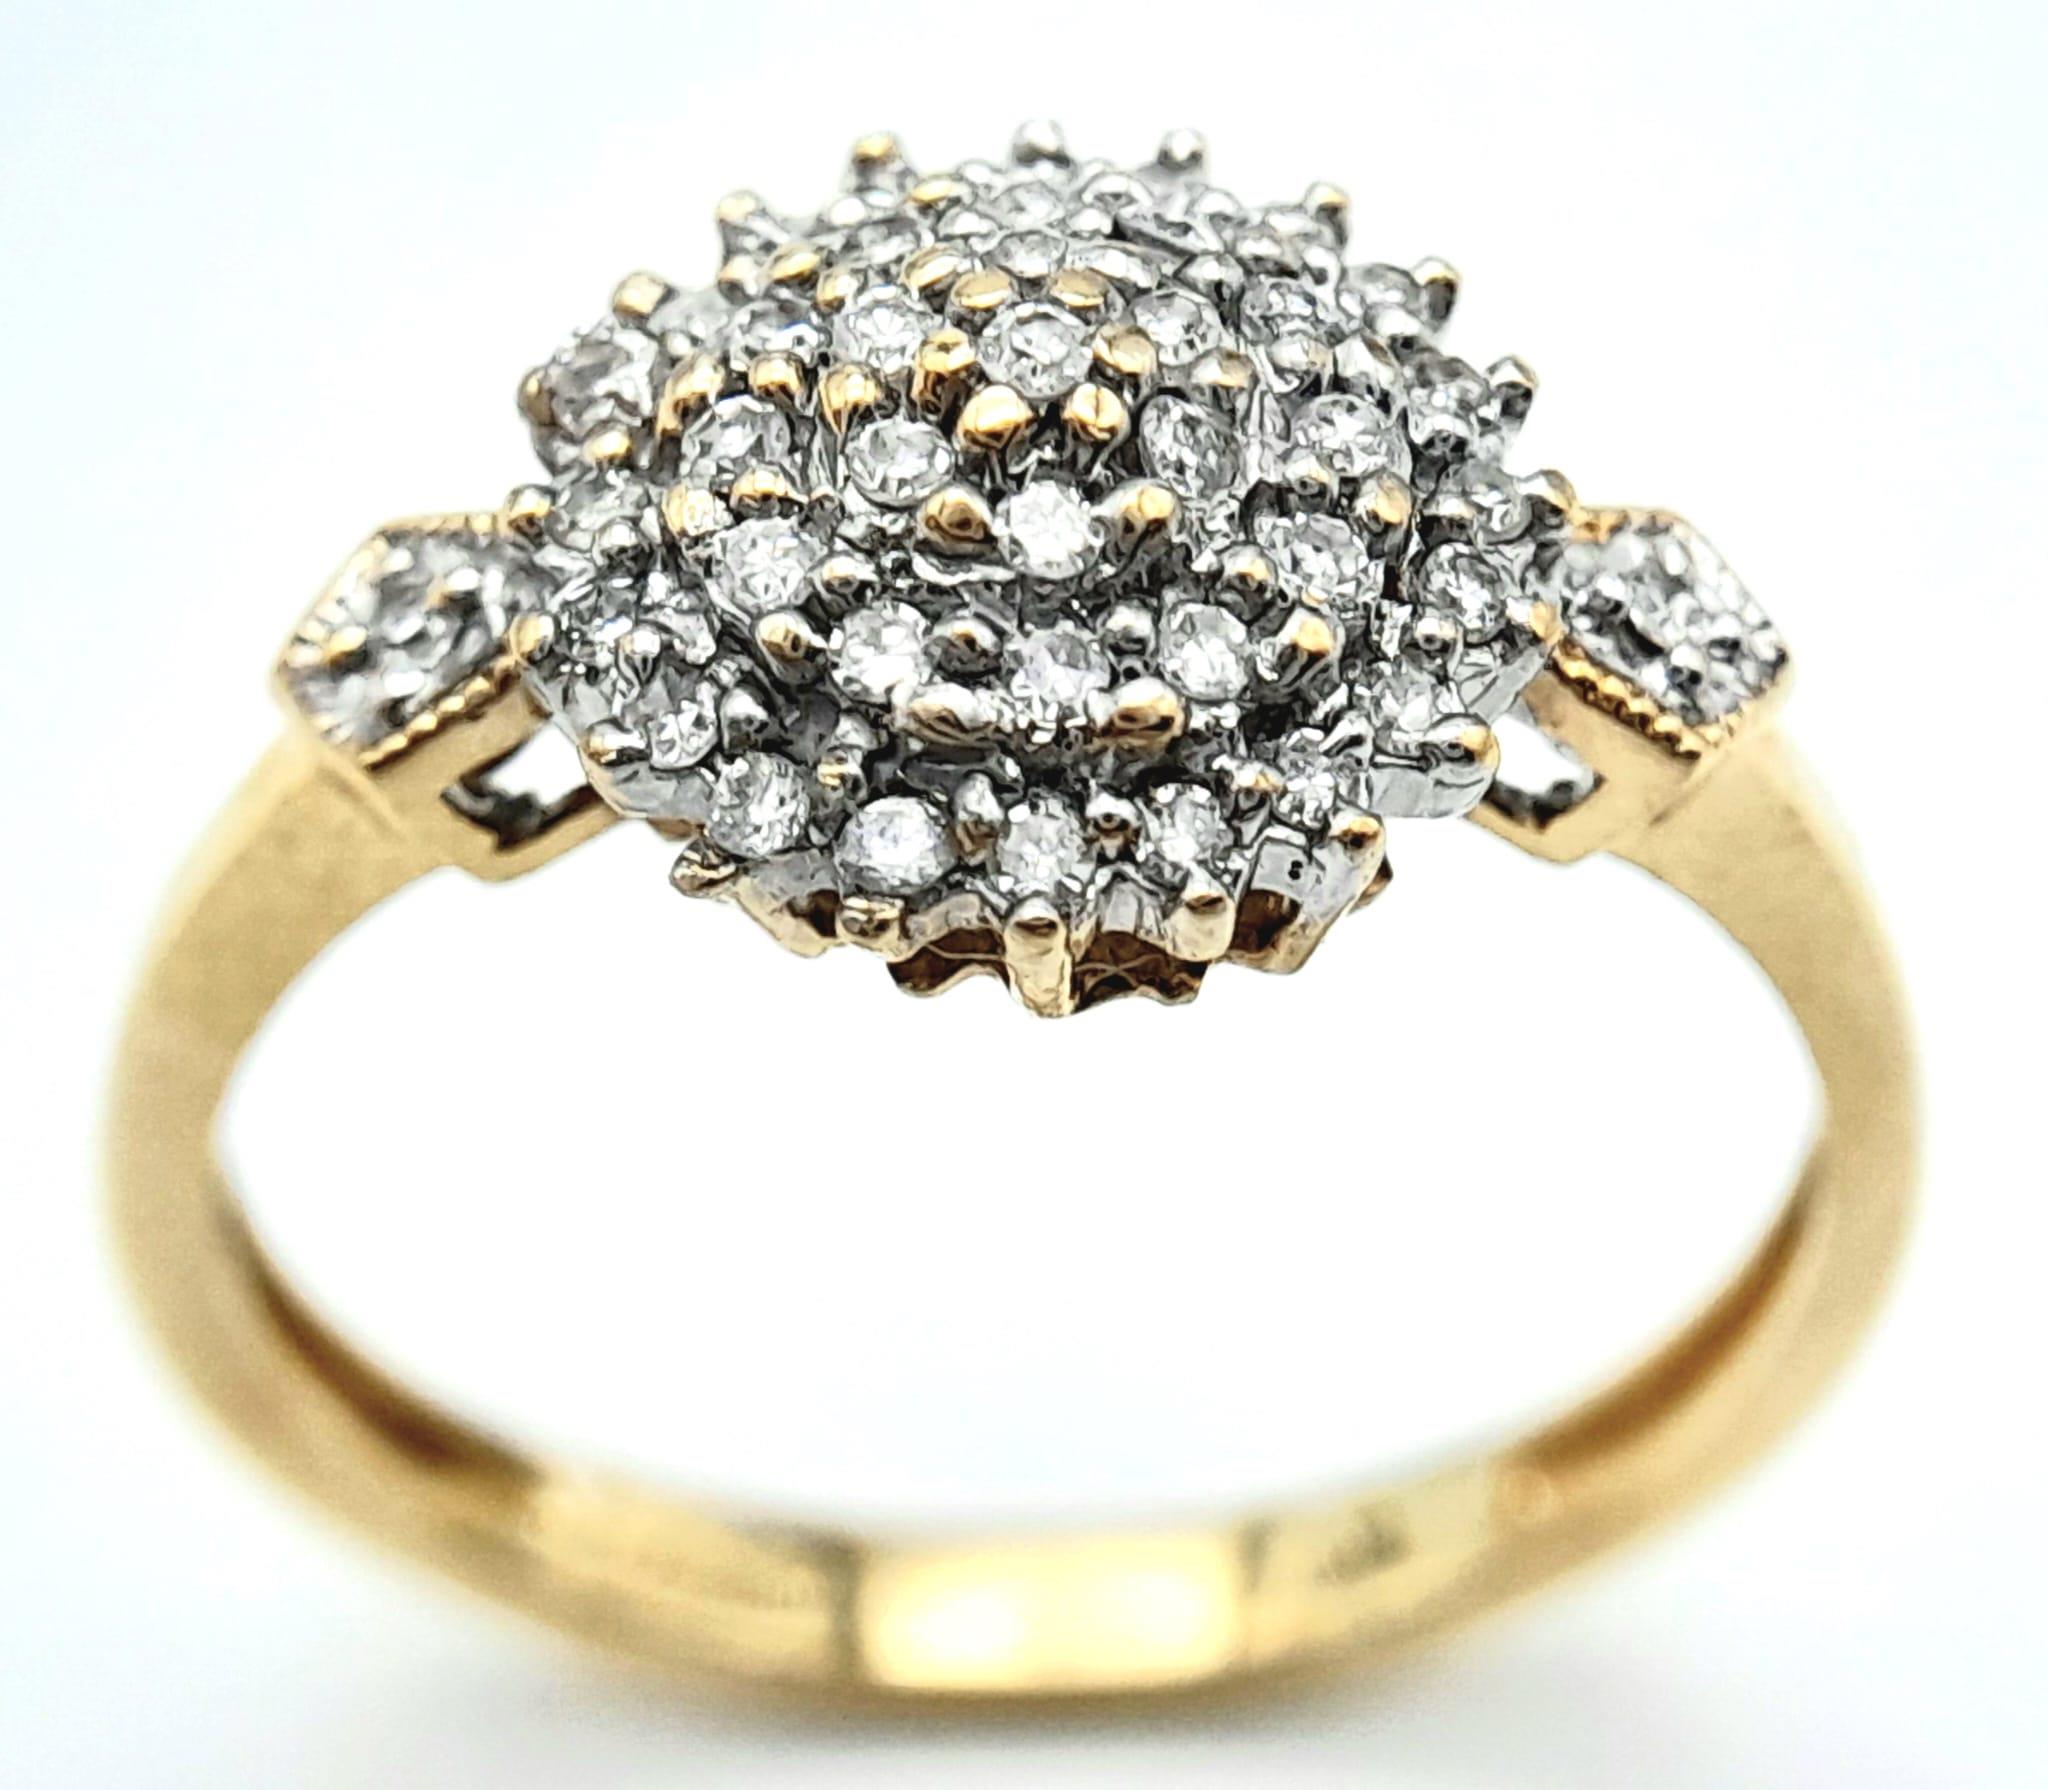 A 9K YELLOW GOLD DIAMOND SET CLUSTER RING. 0.25CTW. 2.2G. SIZE Q. - Image 2 of 6